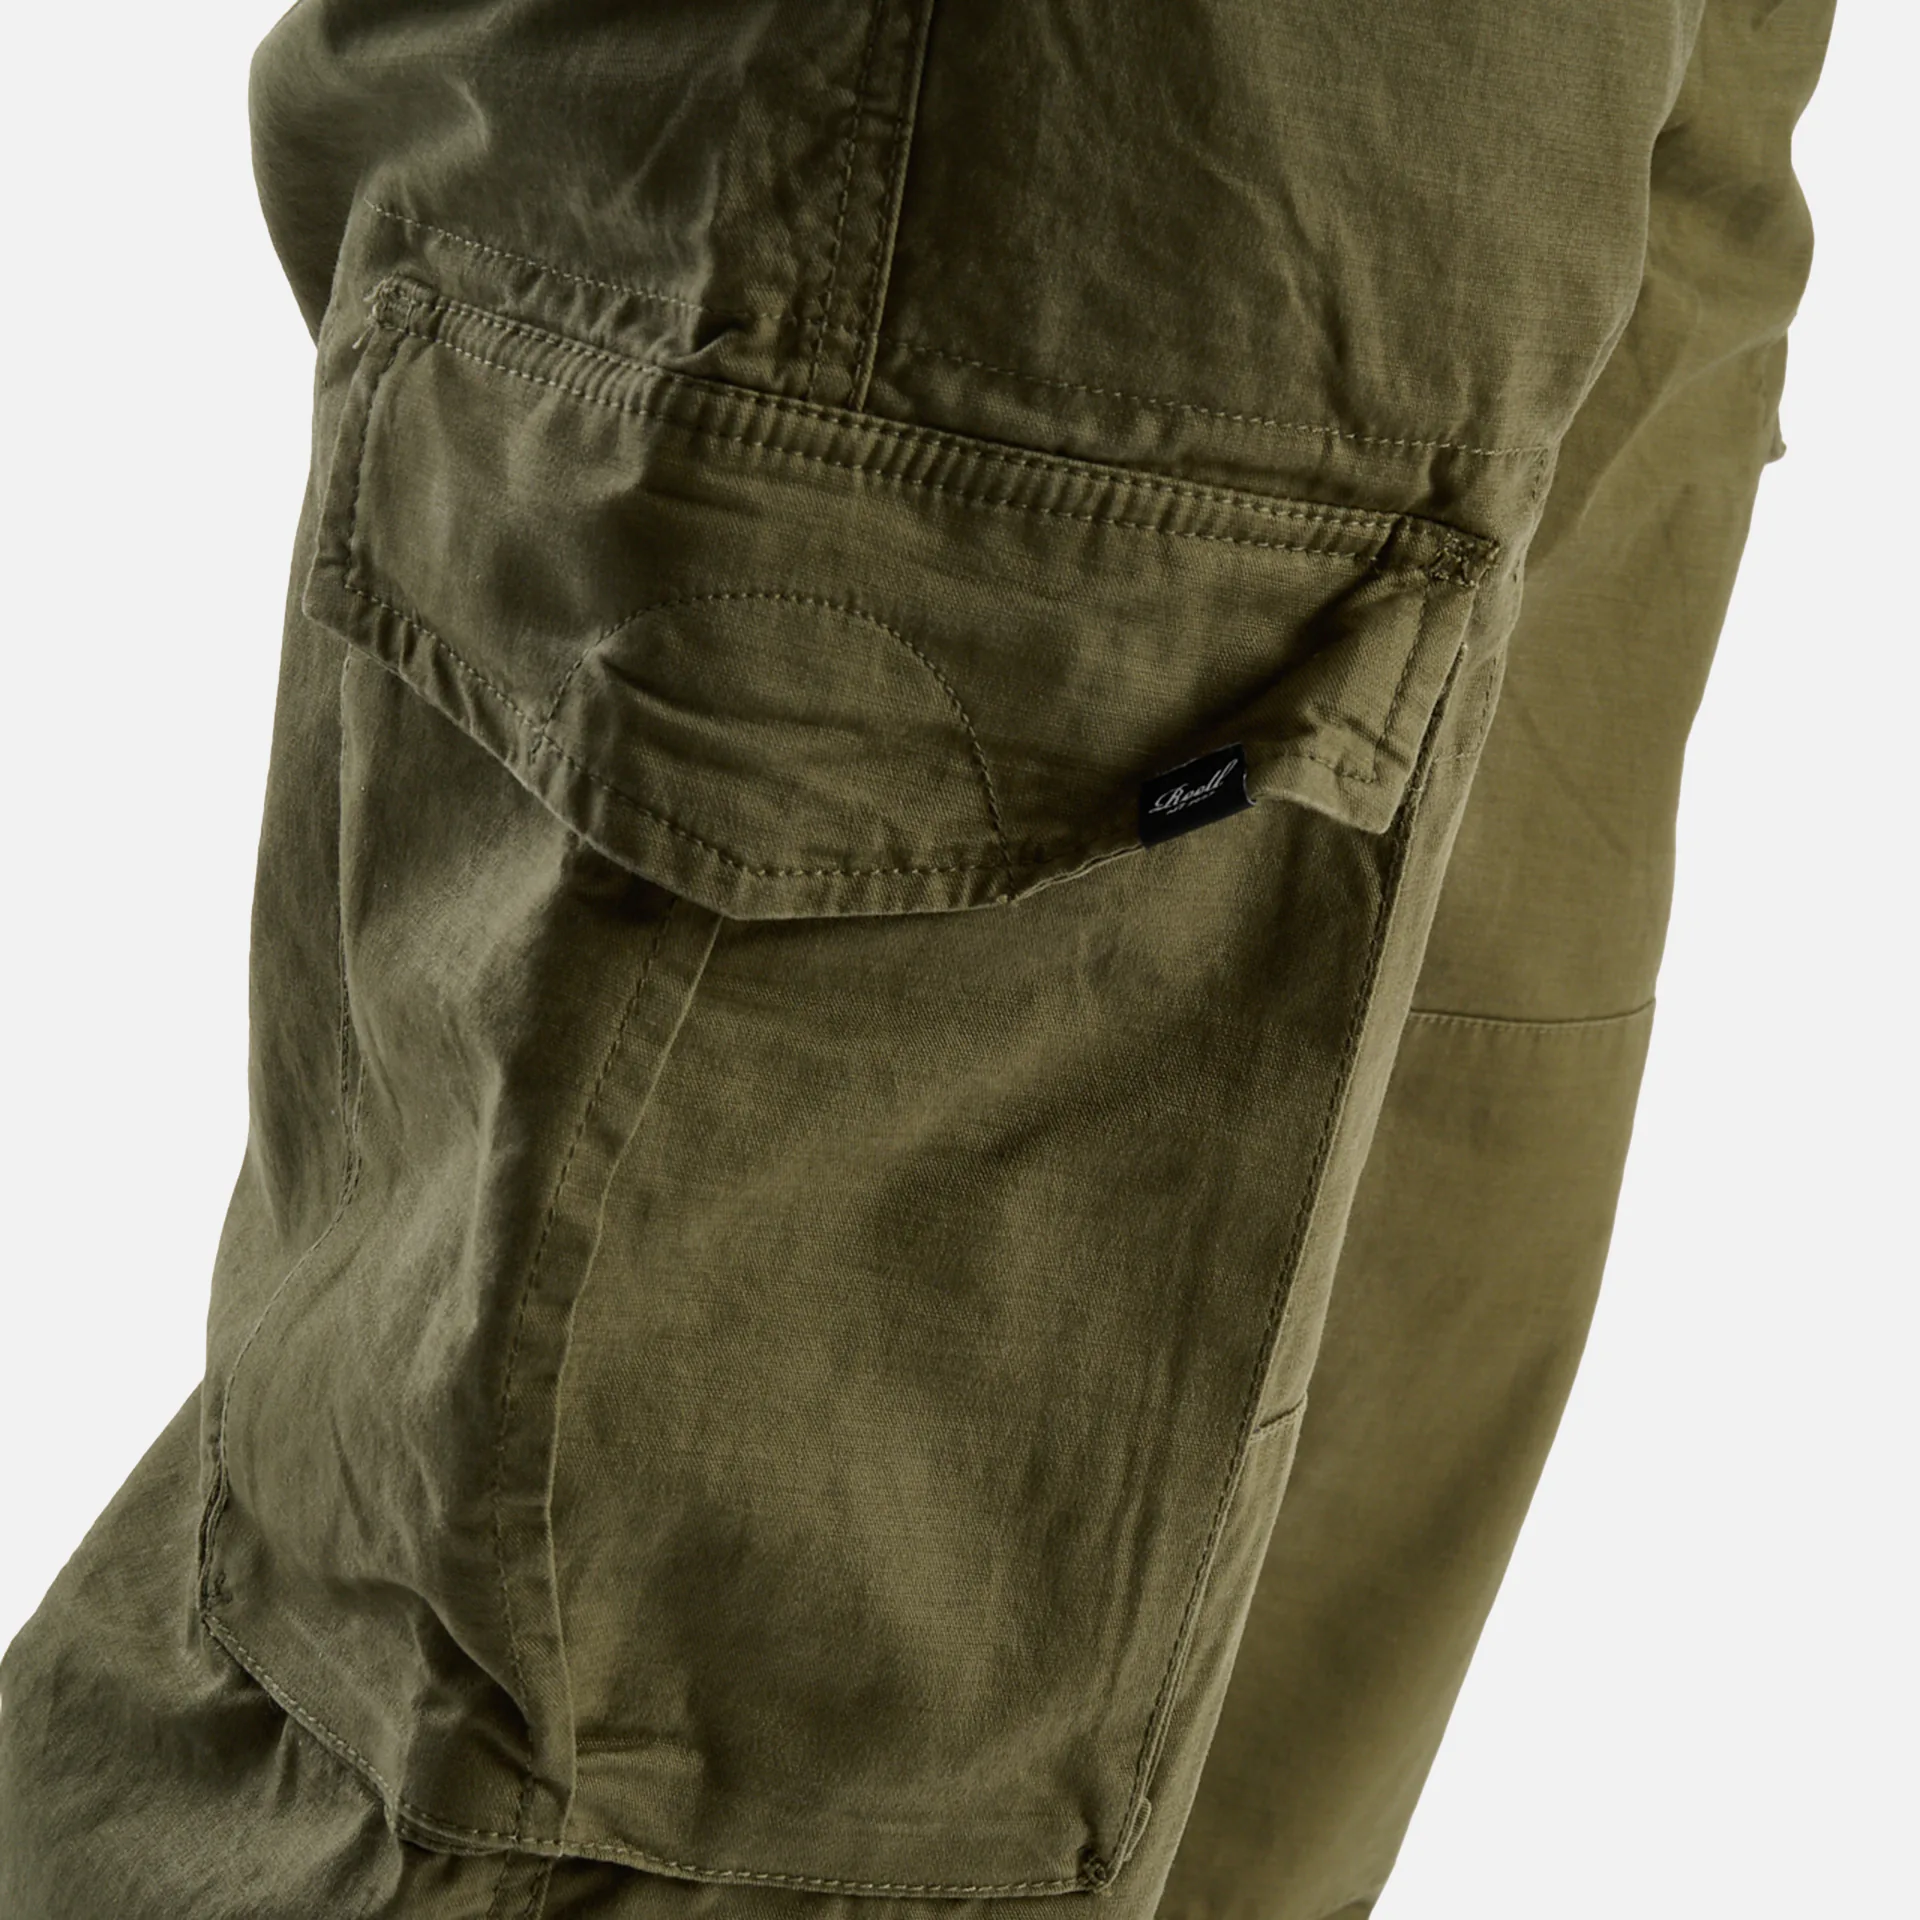 Reell Jeans Flex Cargo LC Pant Olive